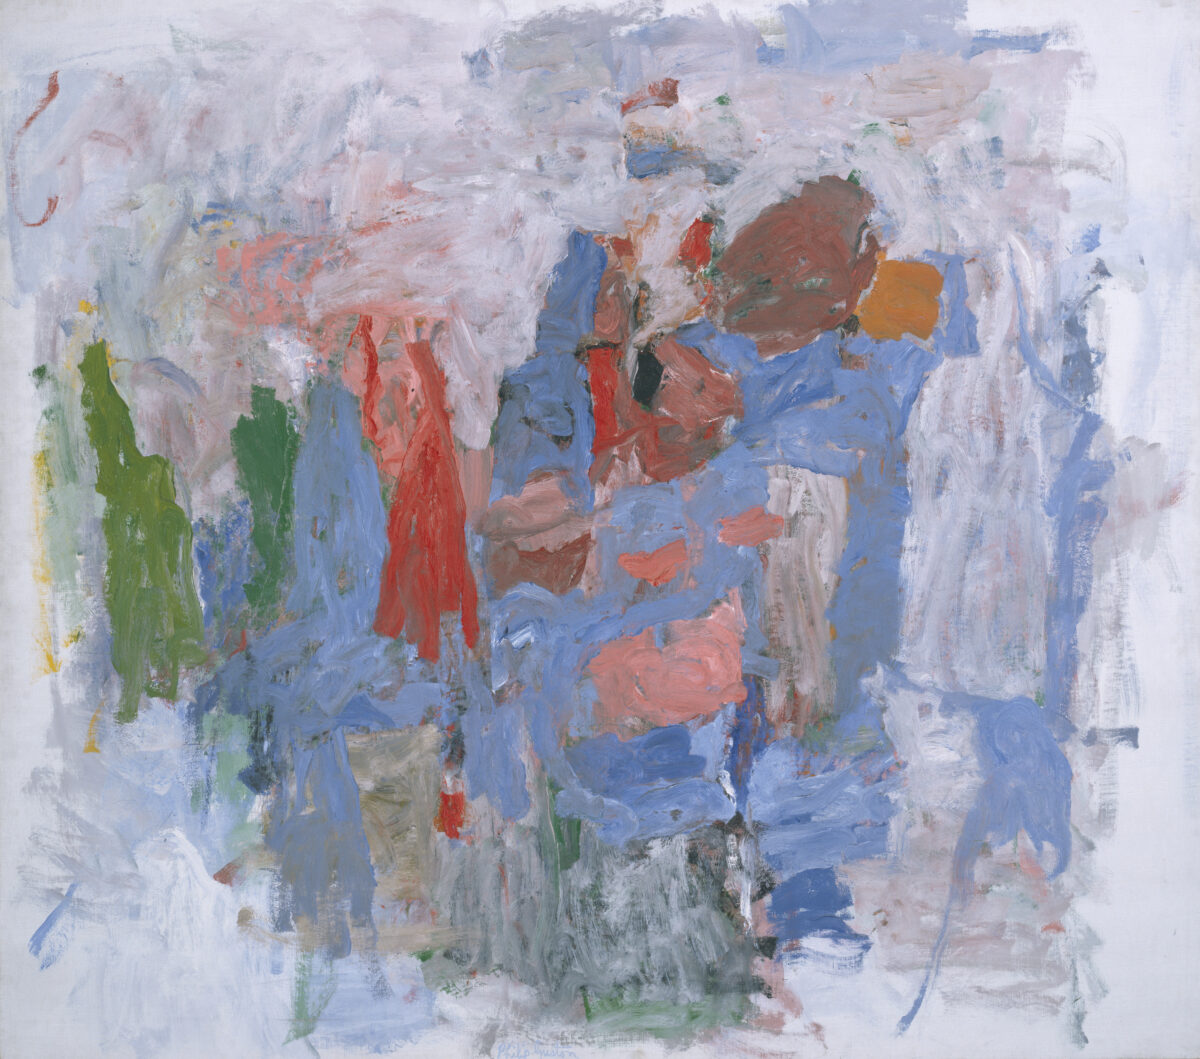 Philip Guston, Passage (1957–1958). Oil on canvas. 165.1 x 188.6 cm. Bequest of Caroline Wiess Law. © The Estate of Philip Guston. Courtesy the artist and The Museum of Fine Arts, Houston.